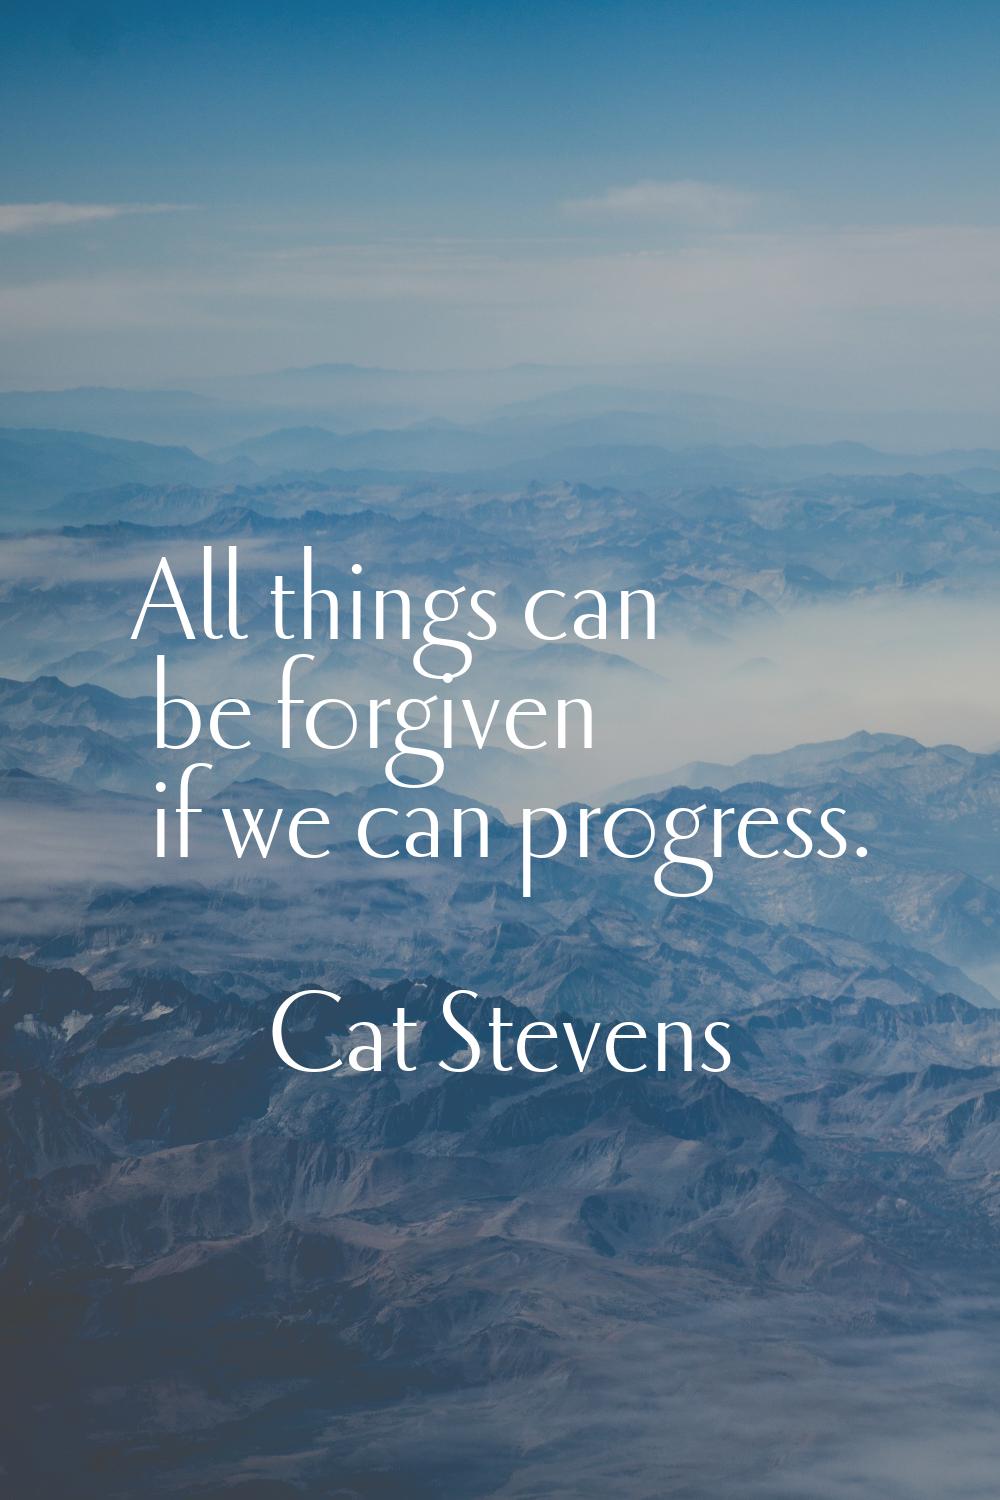 All things can be forgiven if we can progress.